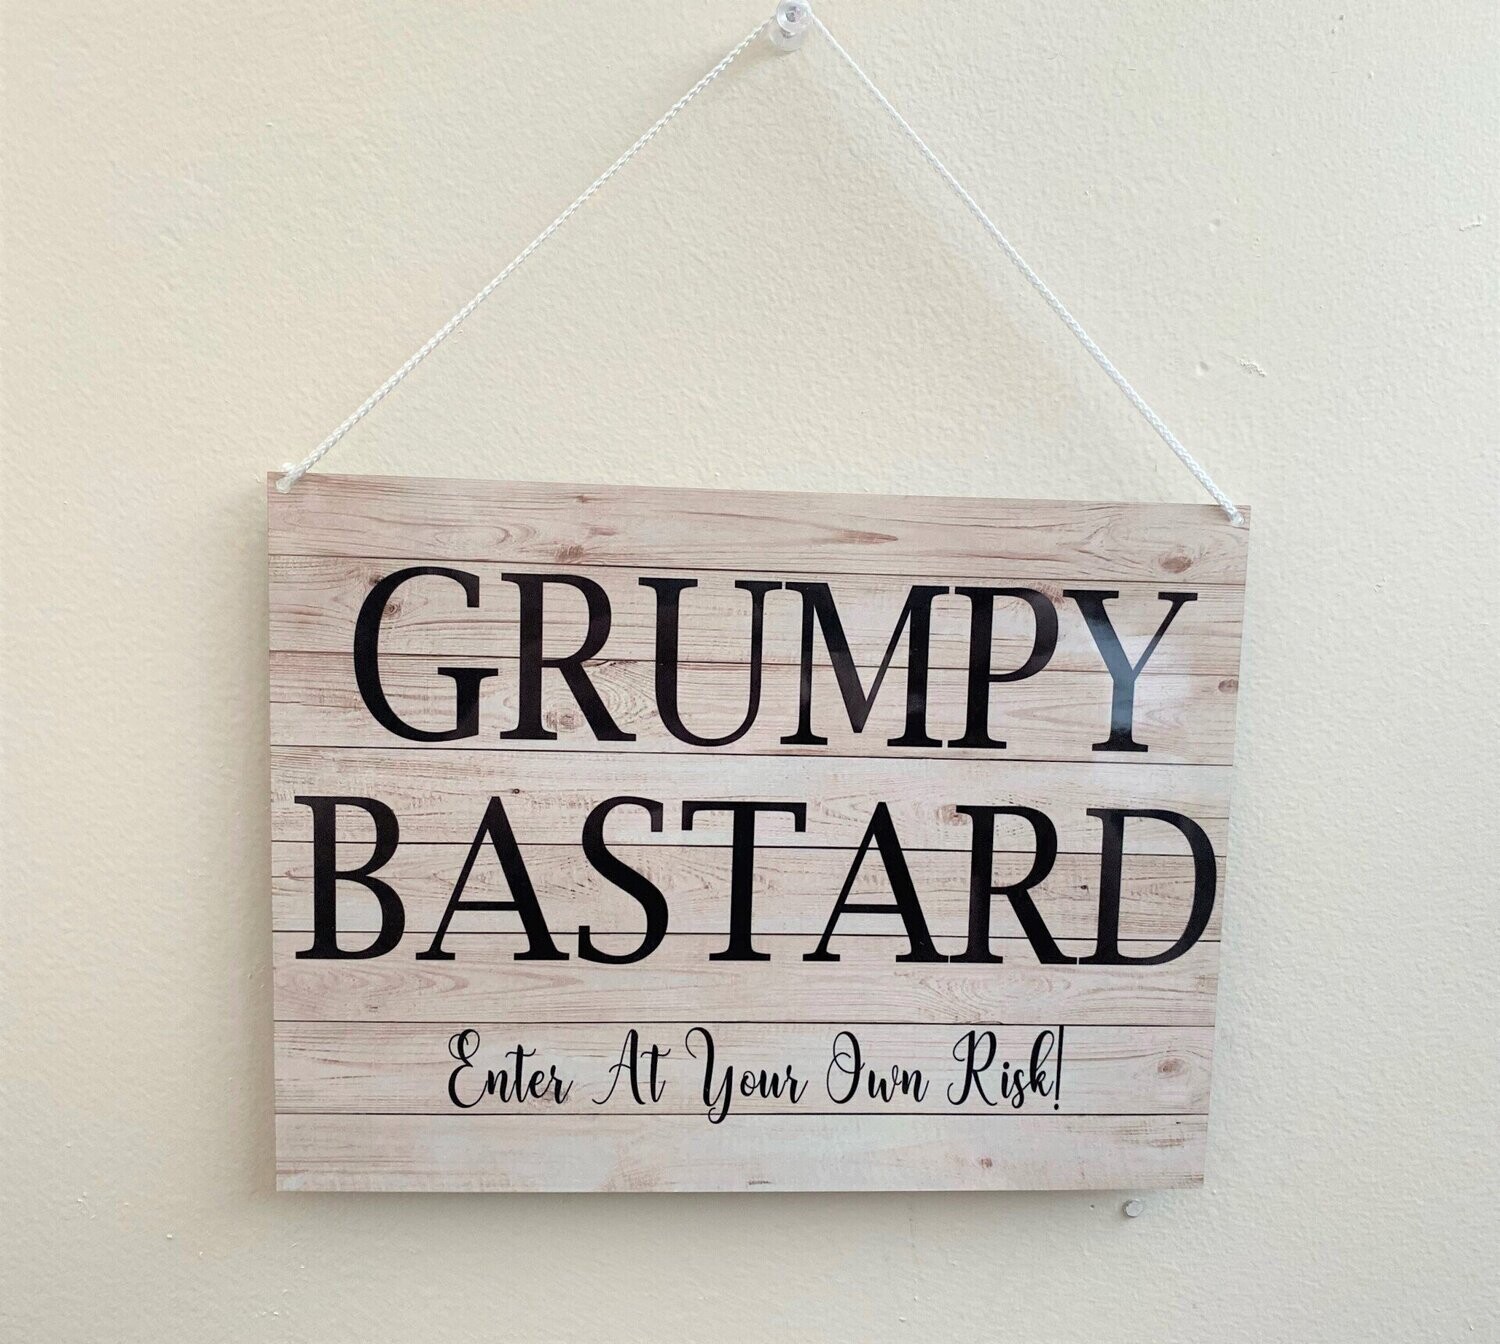 Gumpy Bastard - Enter At Your Own Risk - Funny Metal Sign/Plaque - Mancave - Bar - Home -Father's Day Gift